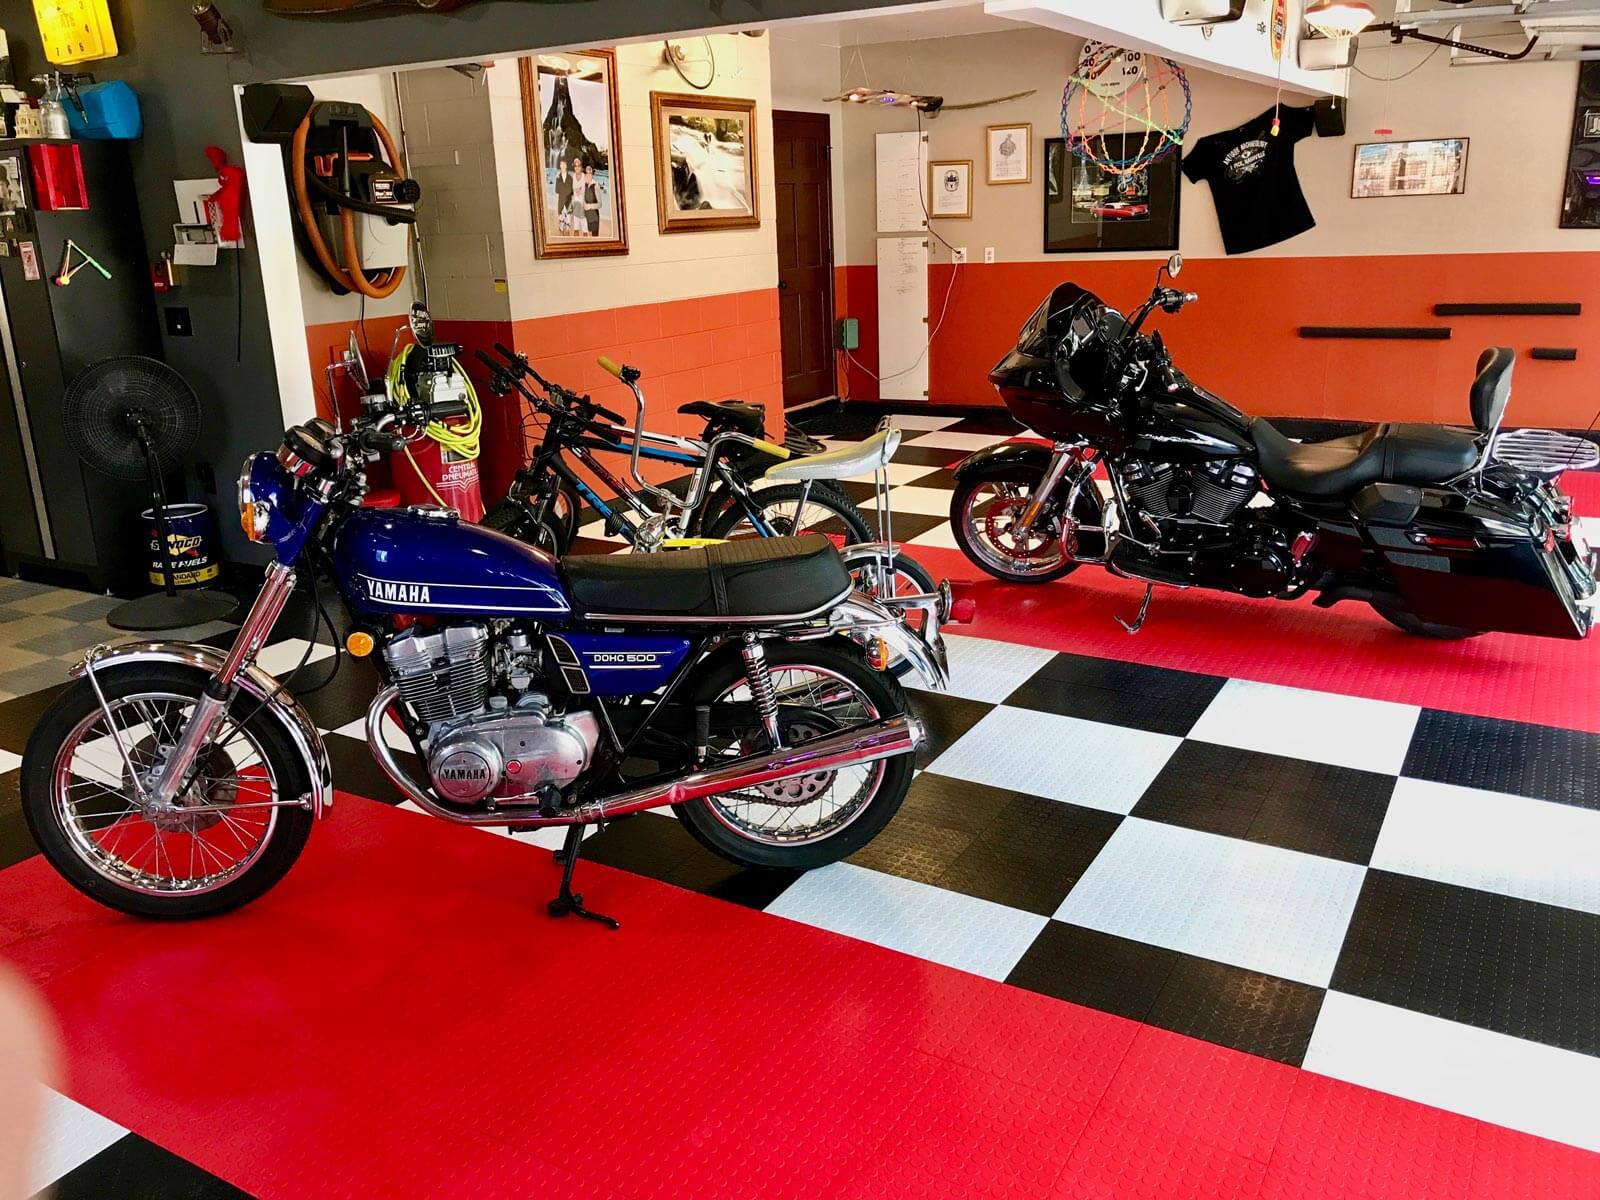 Motorcycles in the garage with CircleTrac flooring